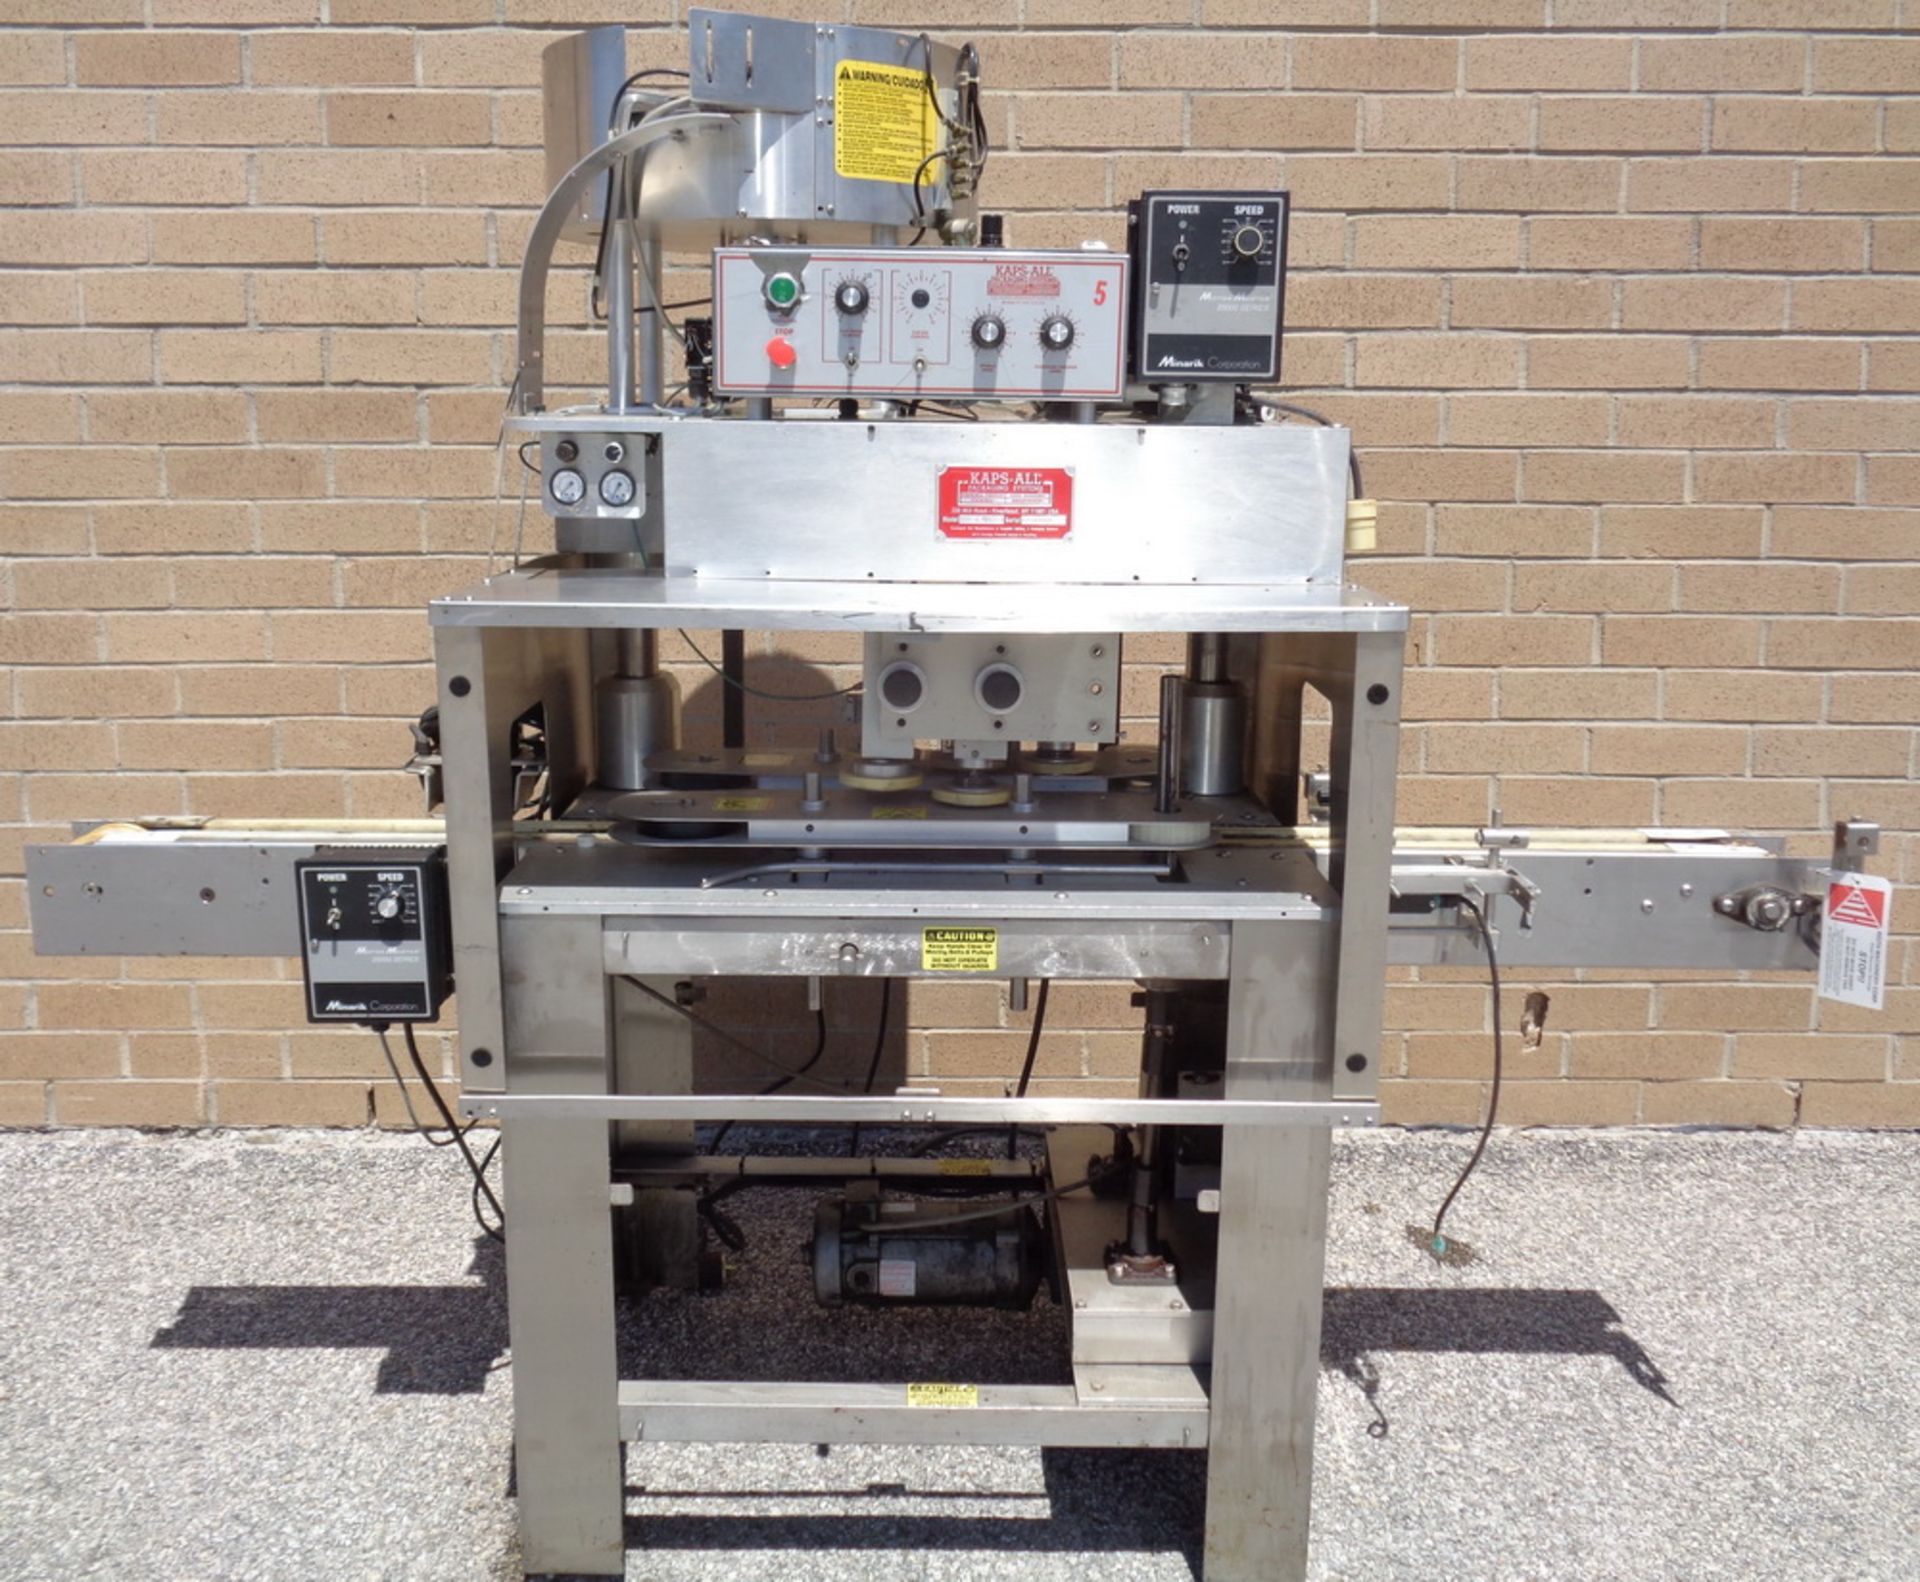 Kaps All 6 Spindle Automatic Capper, Model G-A, S/N 3802. Includes FSRF-24 centrifugal cap feeder.